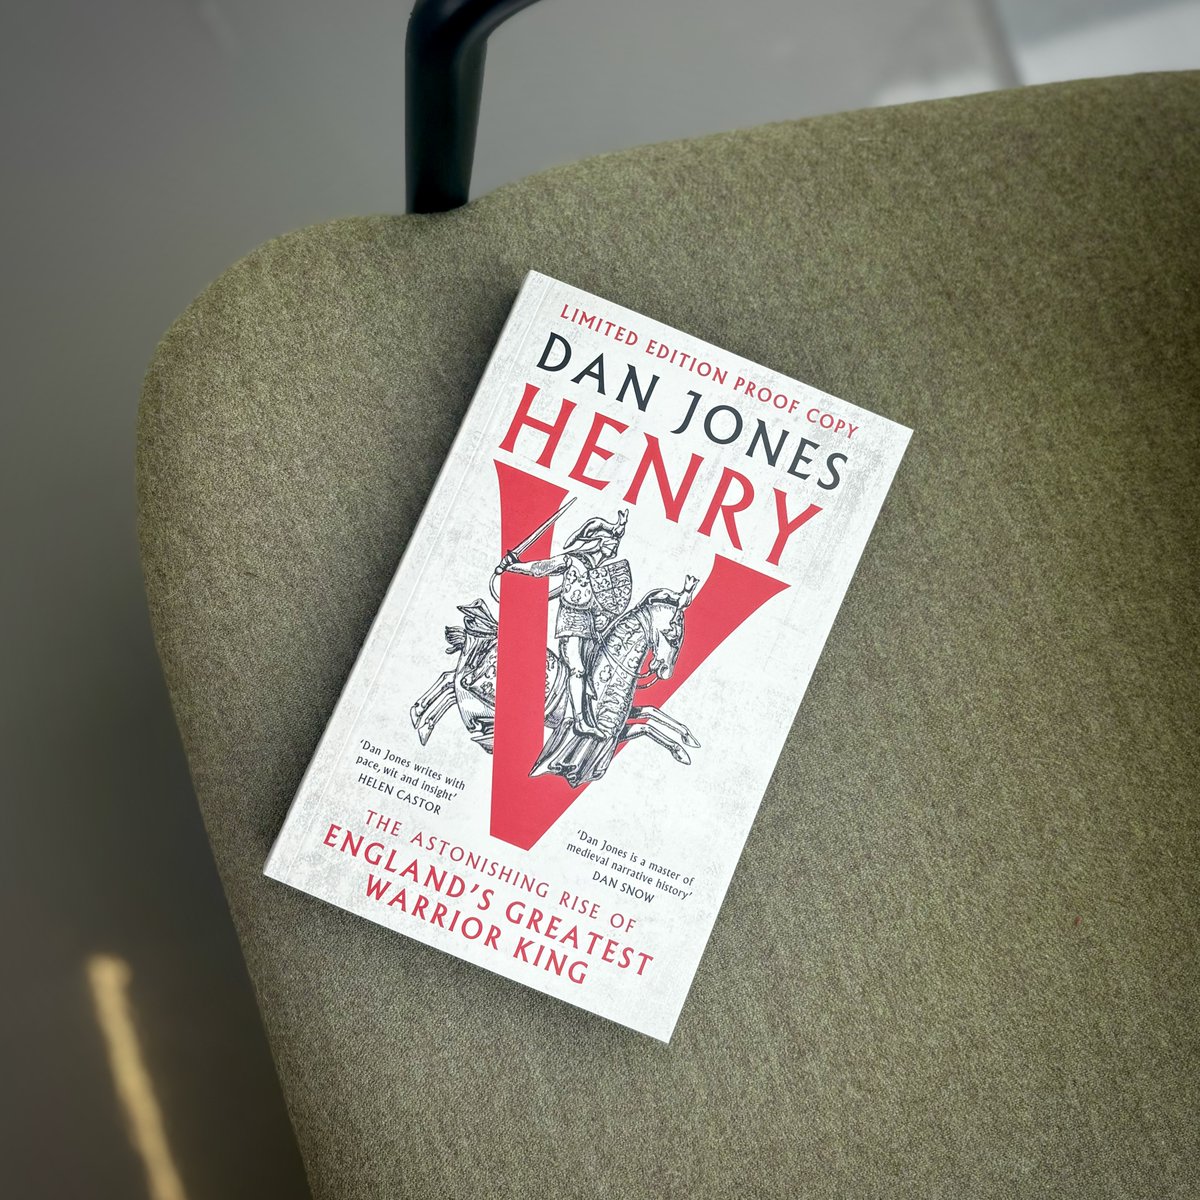 We've had some very exciting book mail this week... Proof copies of #HenryV by @dgjones are here! Coming September 2024 📚